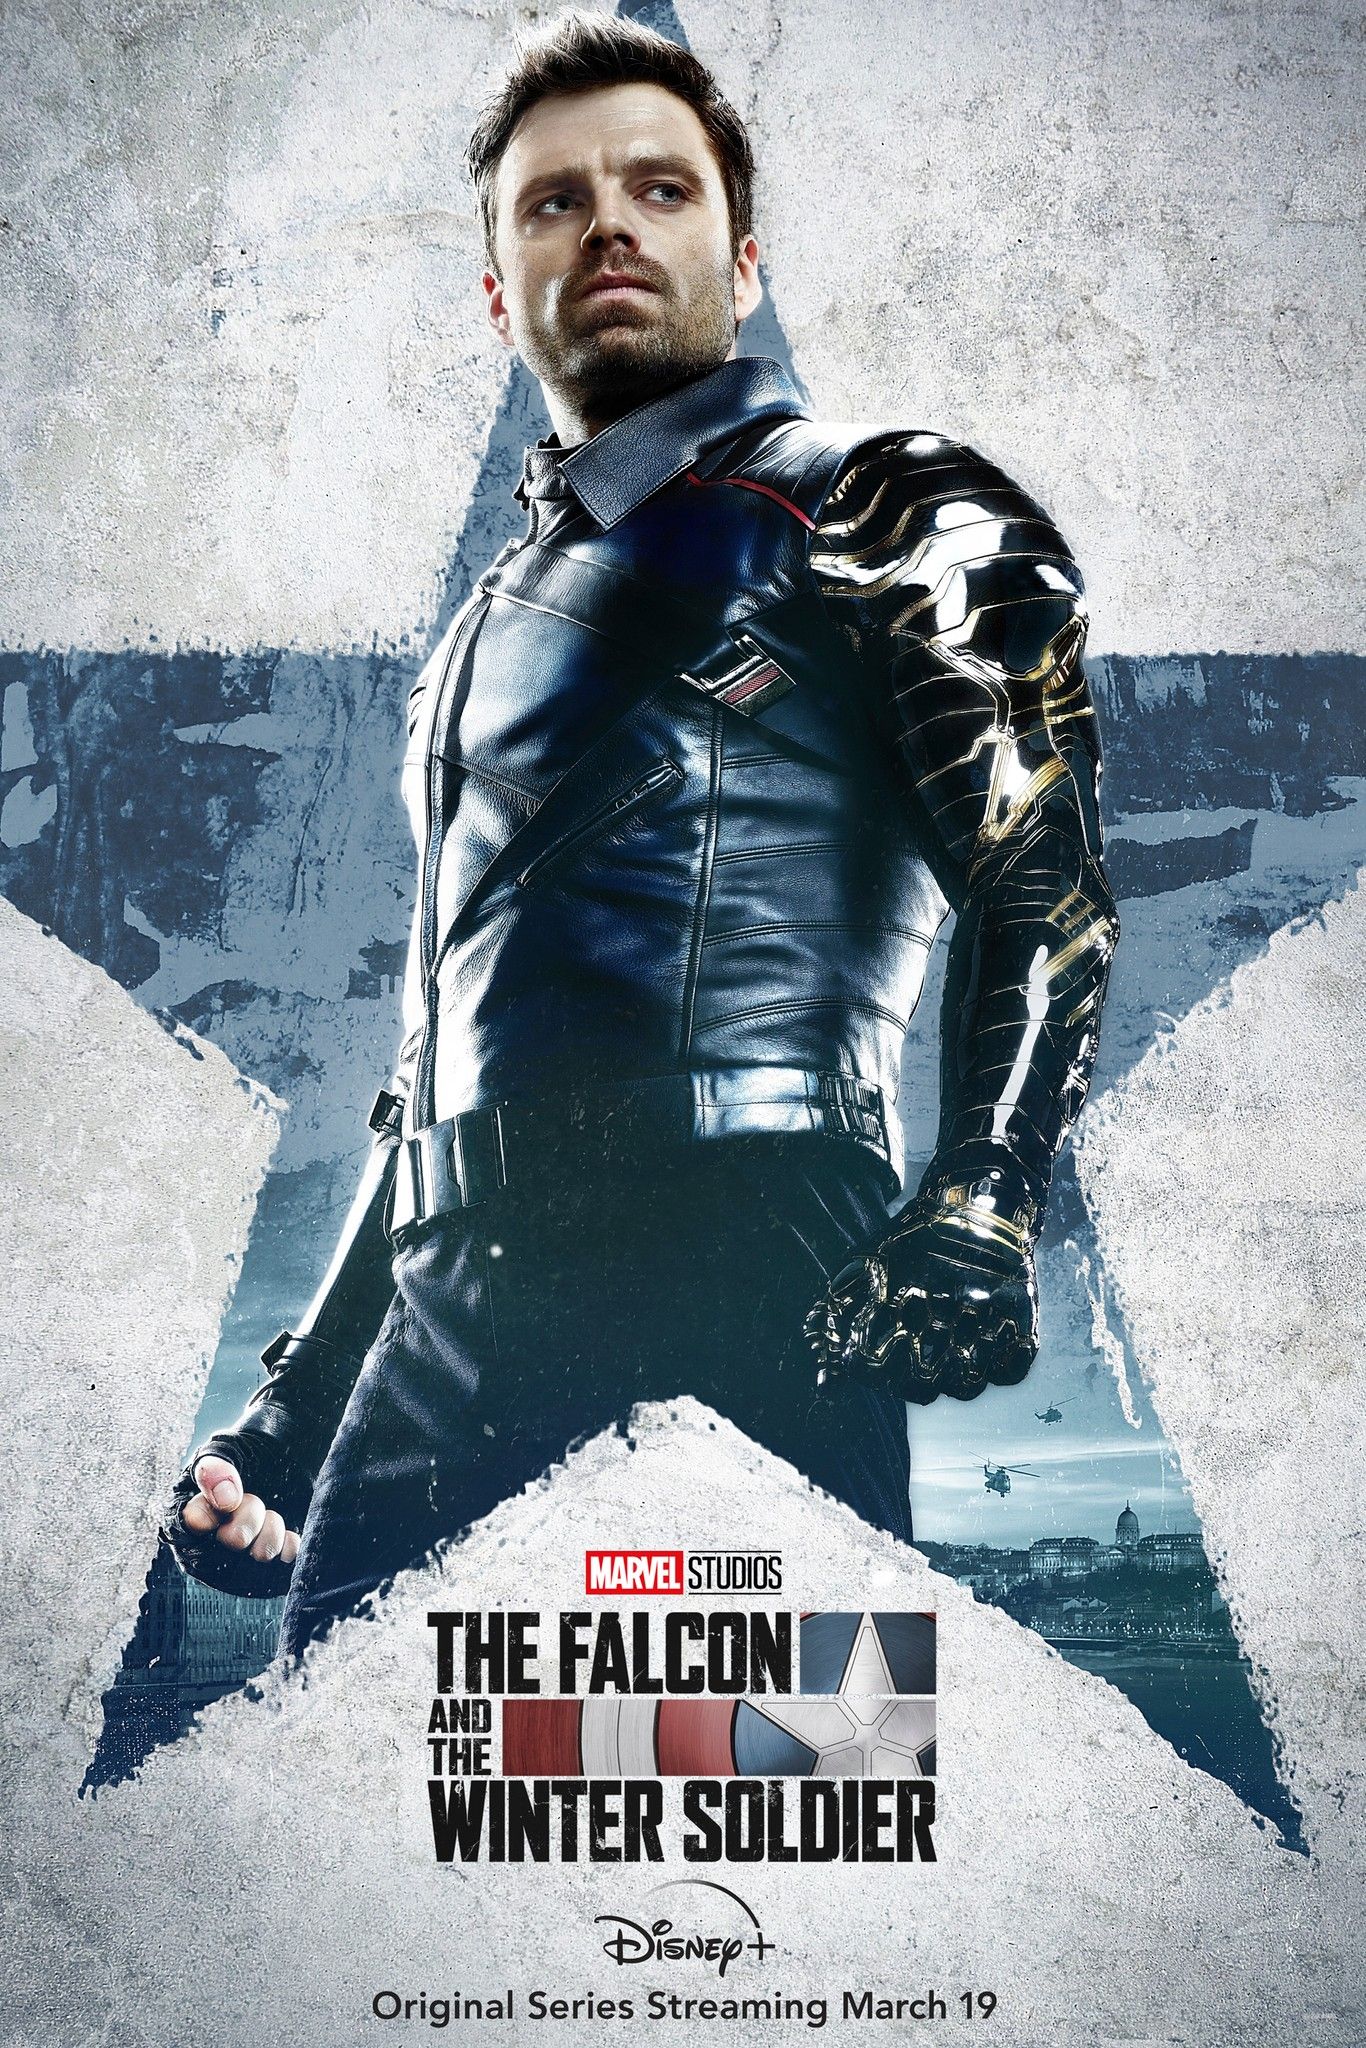 Falcon and Winter Soldier Bucky Barnes character poster